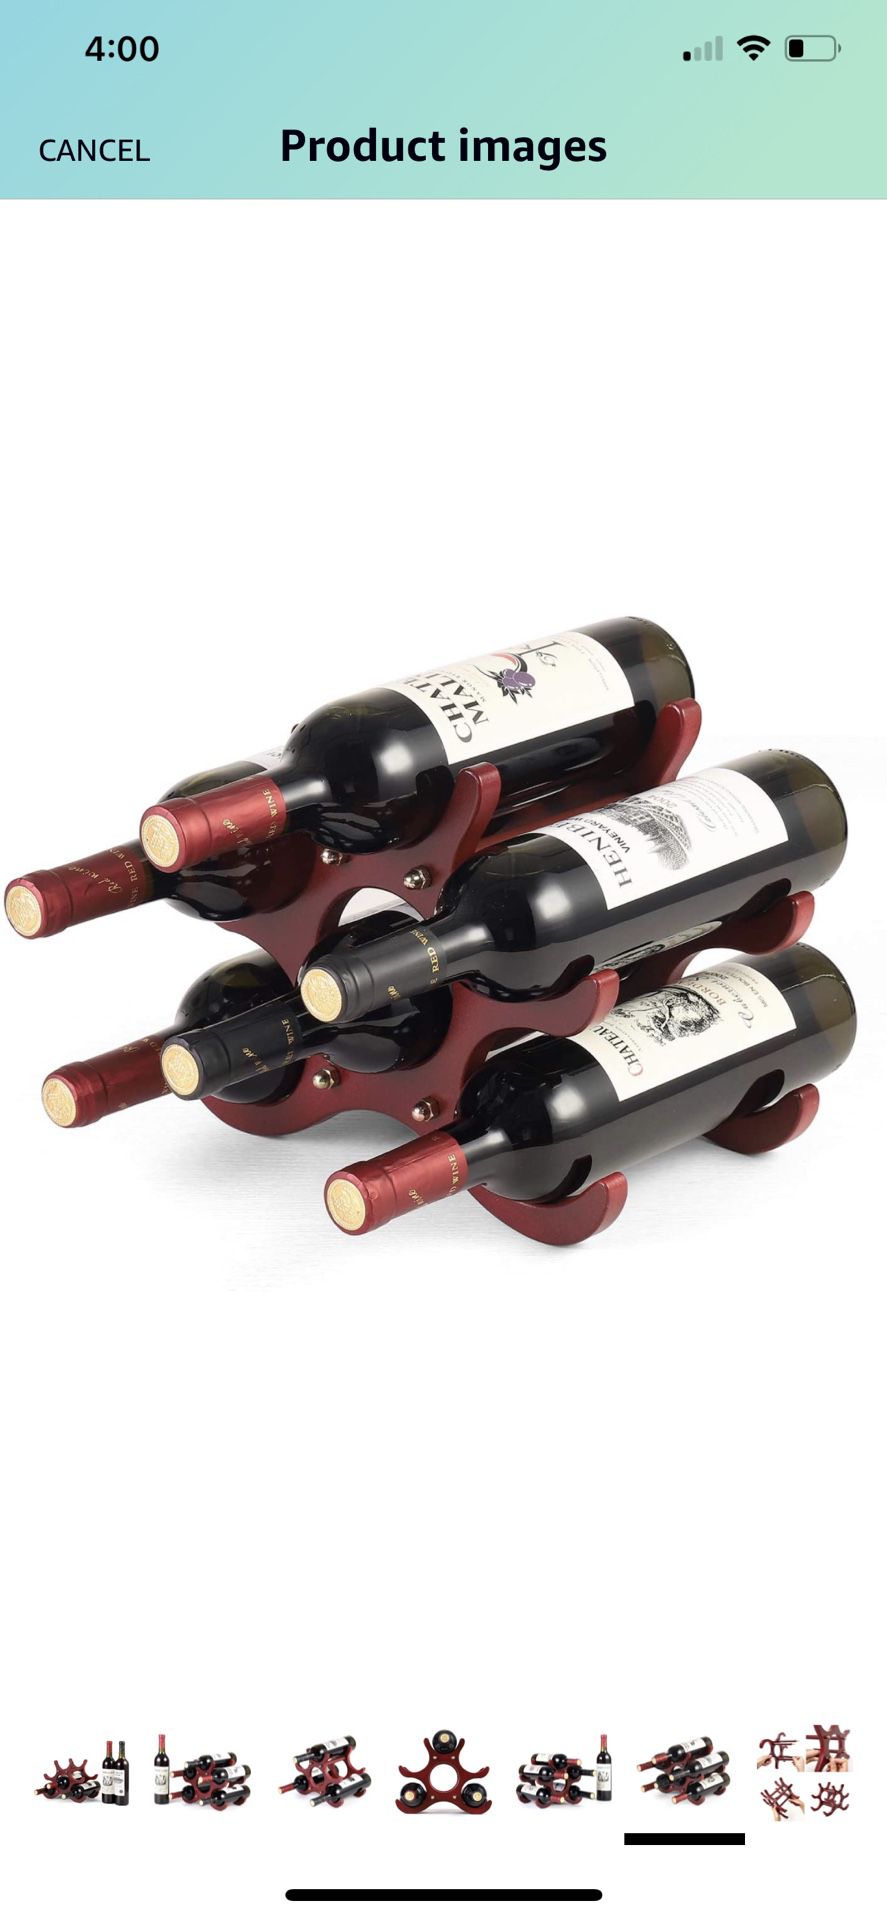 Brand New kxin Countertop Wine Racks, Hold 6 Bottles Wine, Wine Holder and Storage, for Home Decor & Kitchen Storage Rack, Bar, Wine Party, Made in Wo